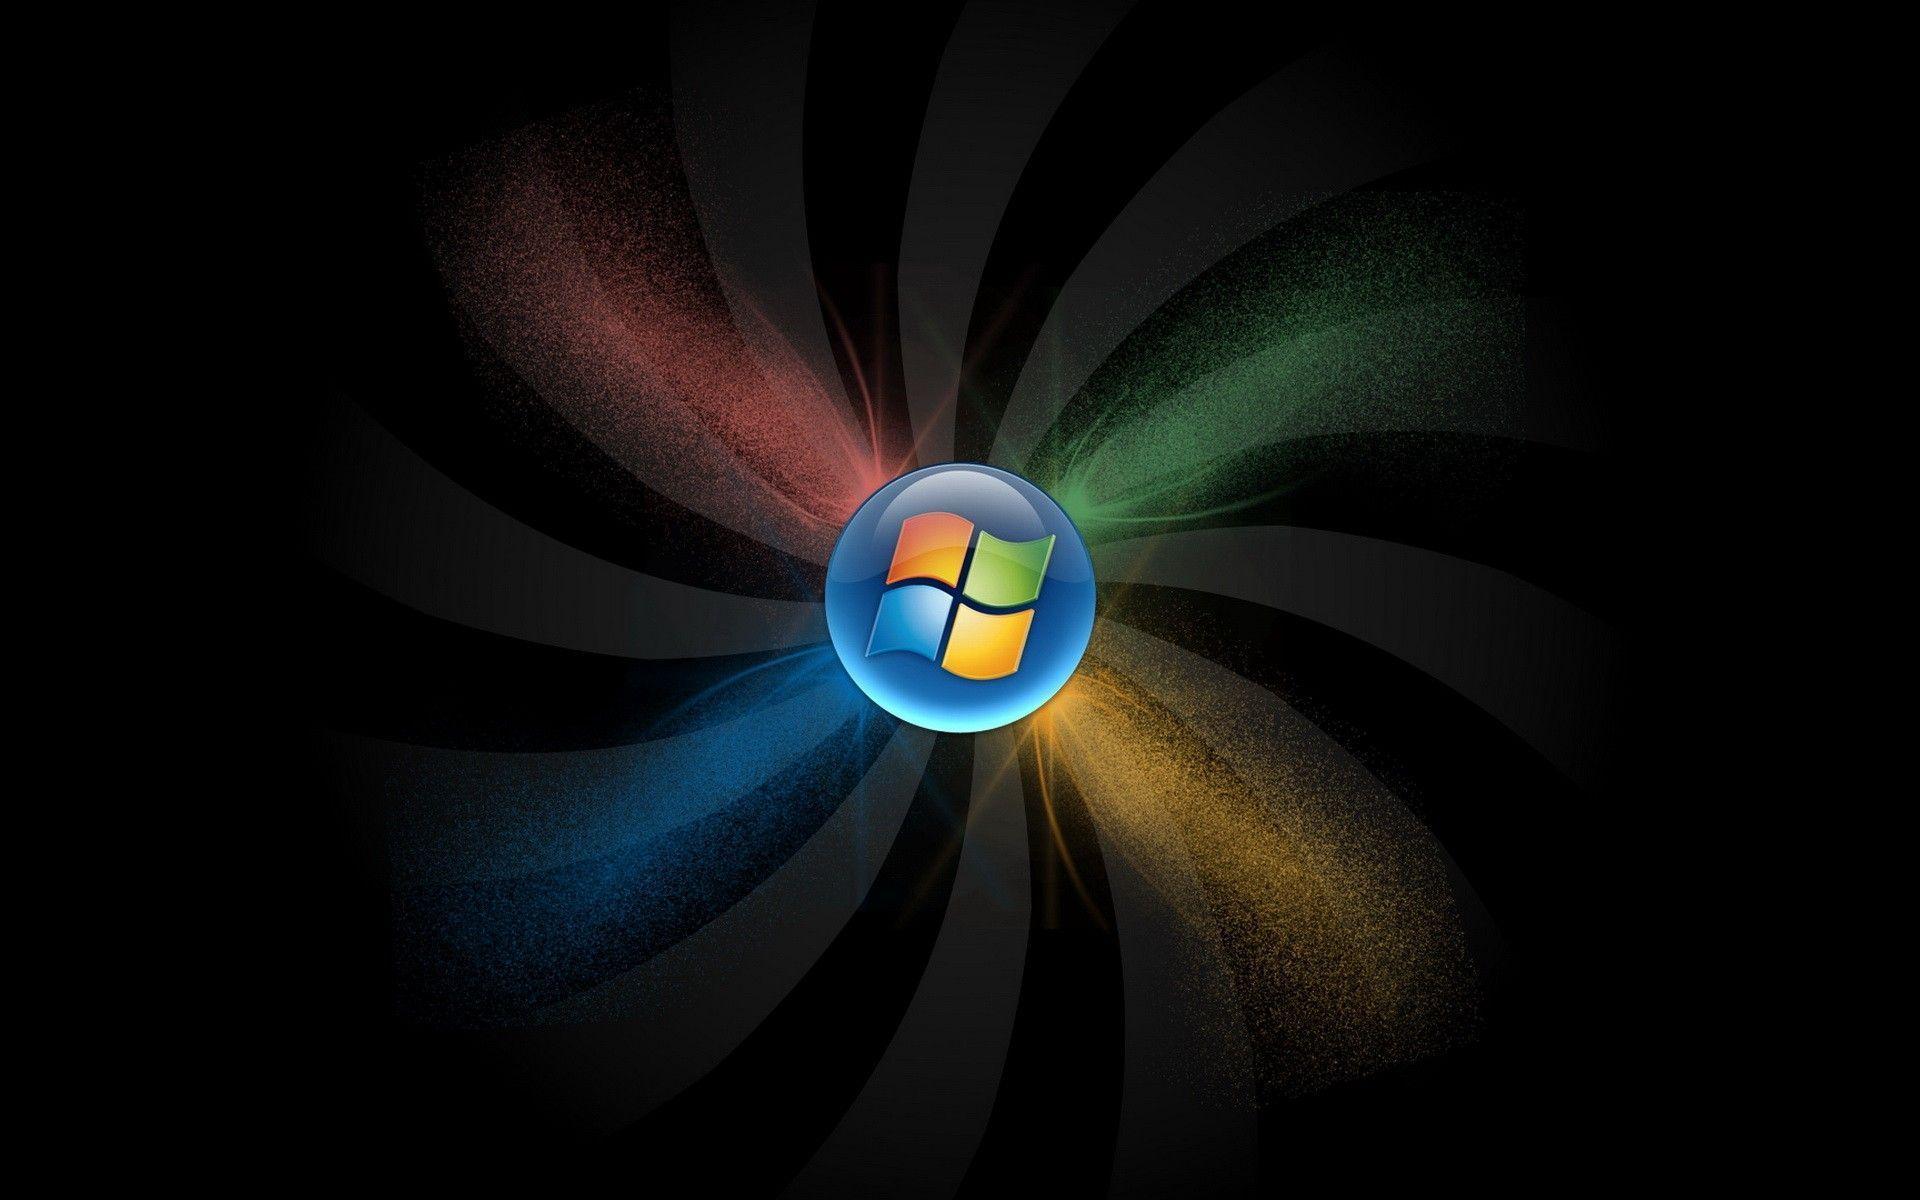 Microsoft Backgrounds 38 2099 HD Wallpapers